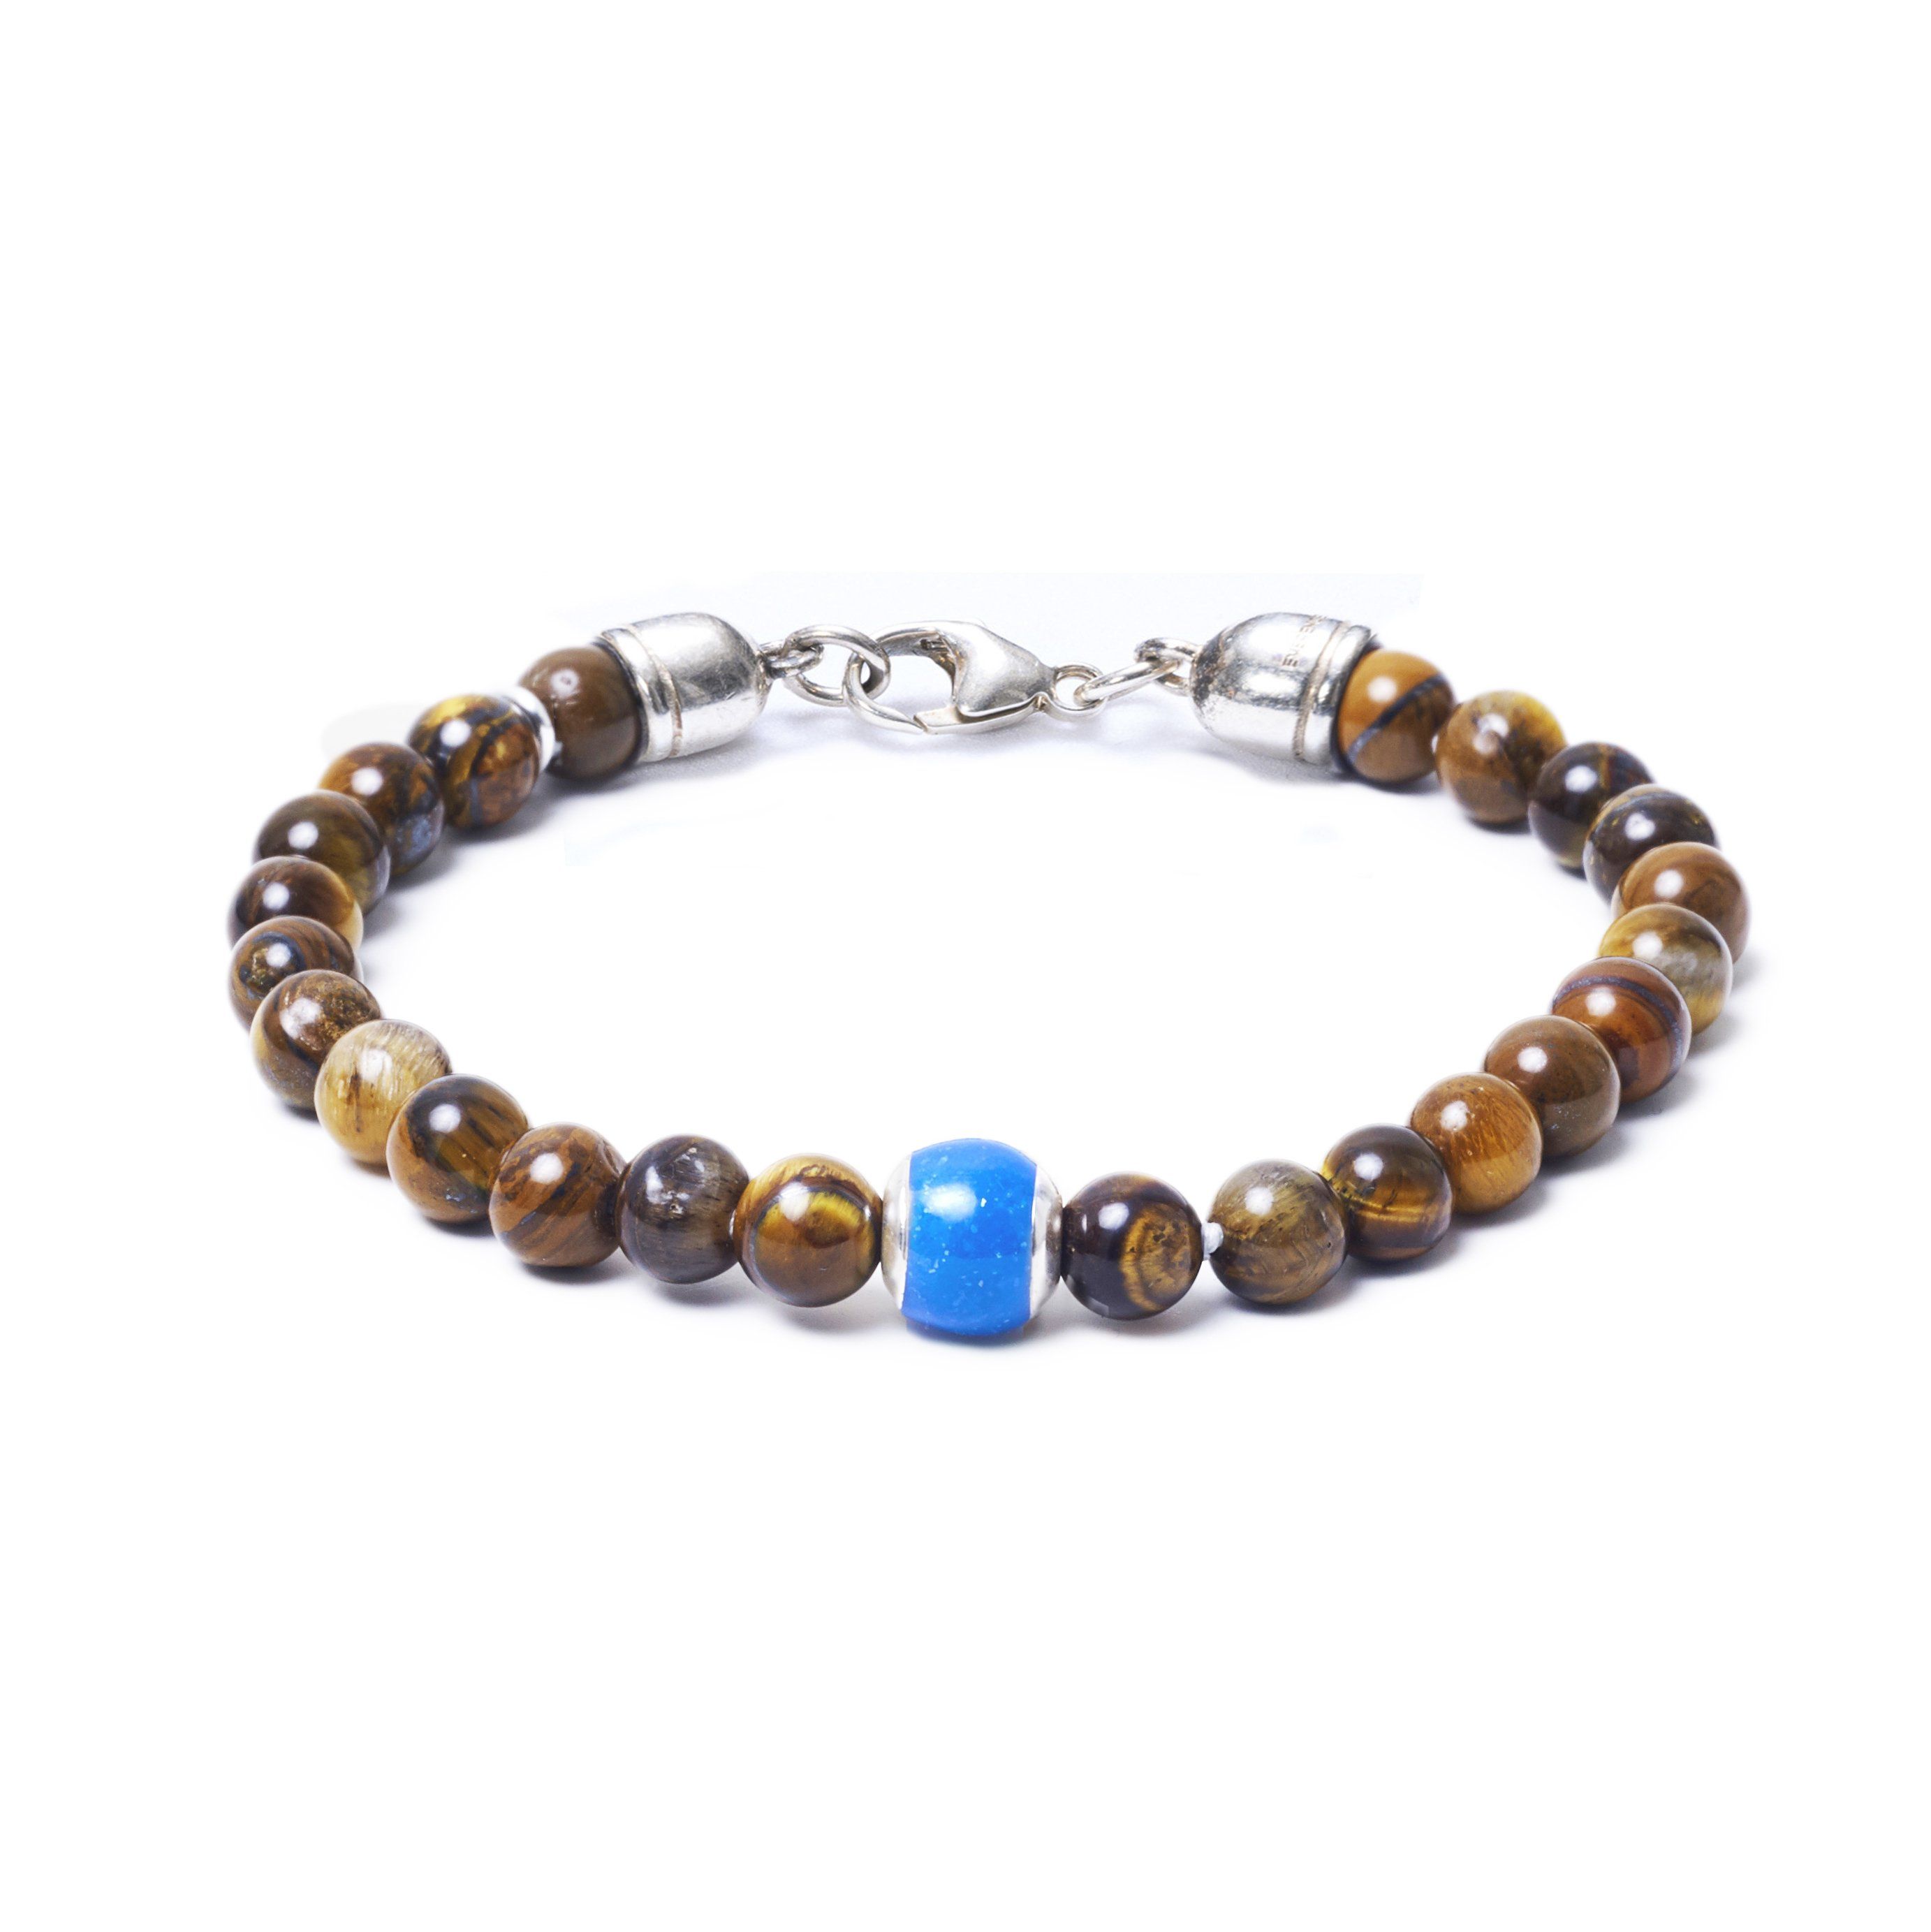 Tiger Eye, One Everence Bead everence.life 